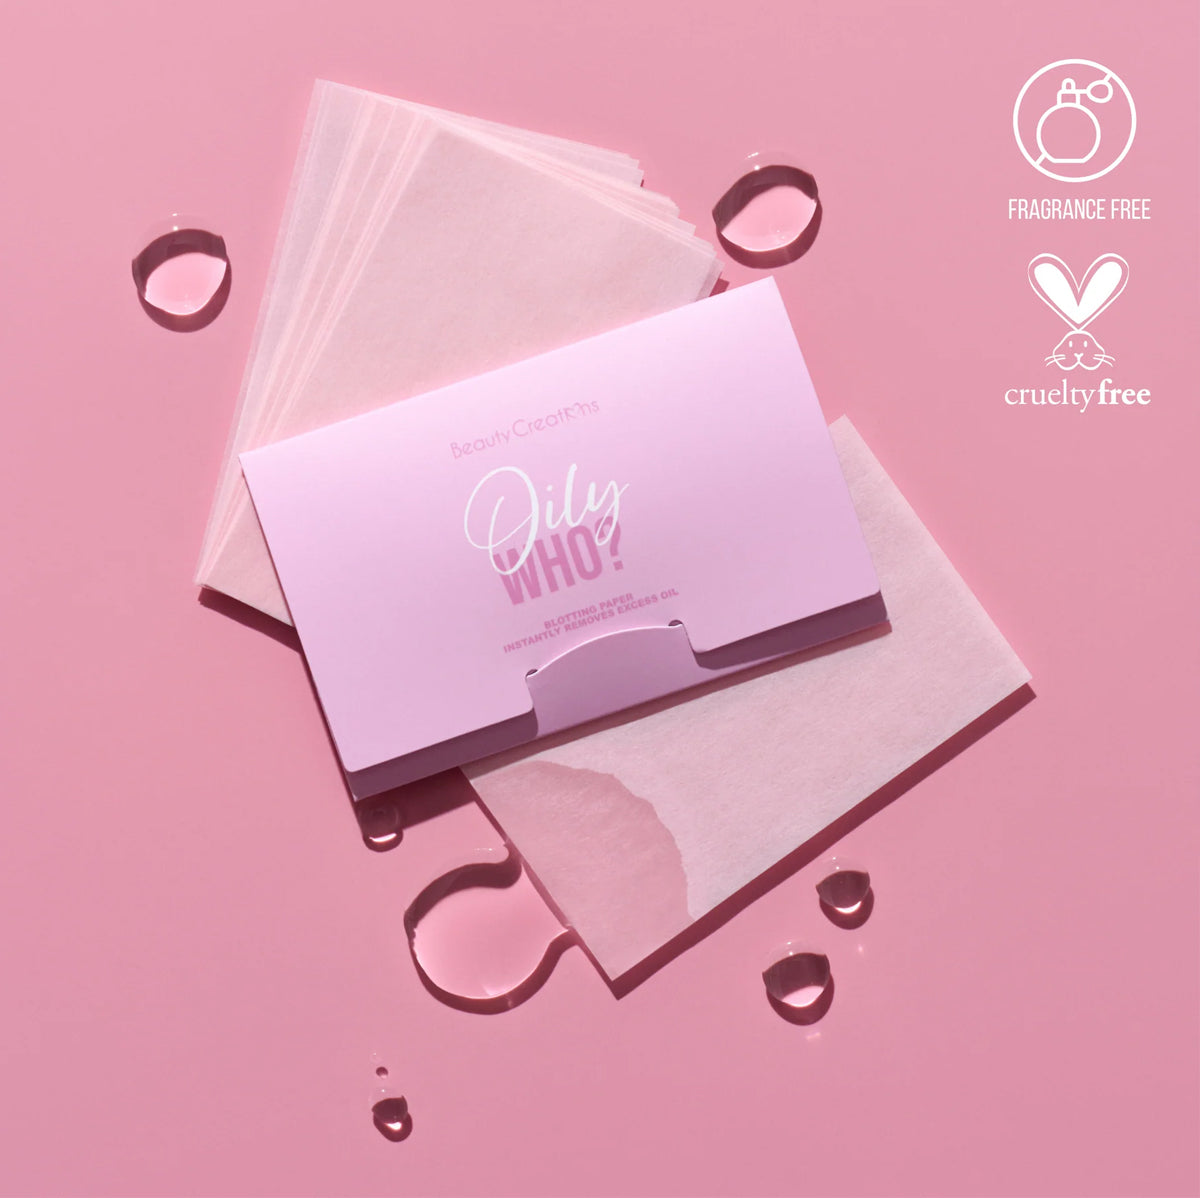 OILY WHO PINK PAPEL SECANTE - BEAUTY CREATIONS